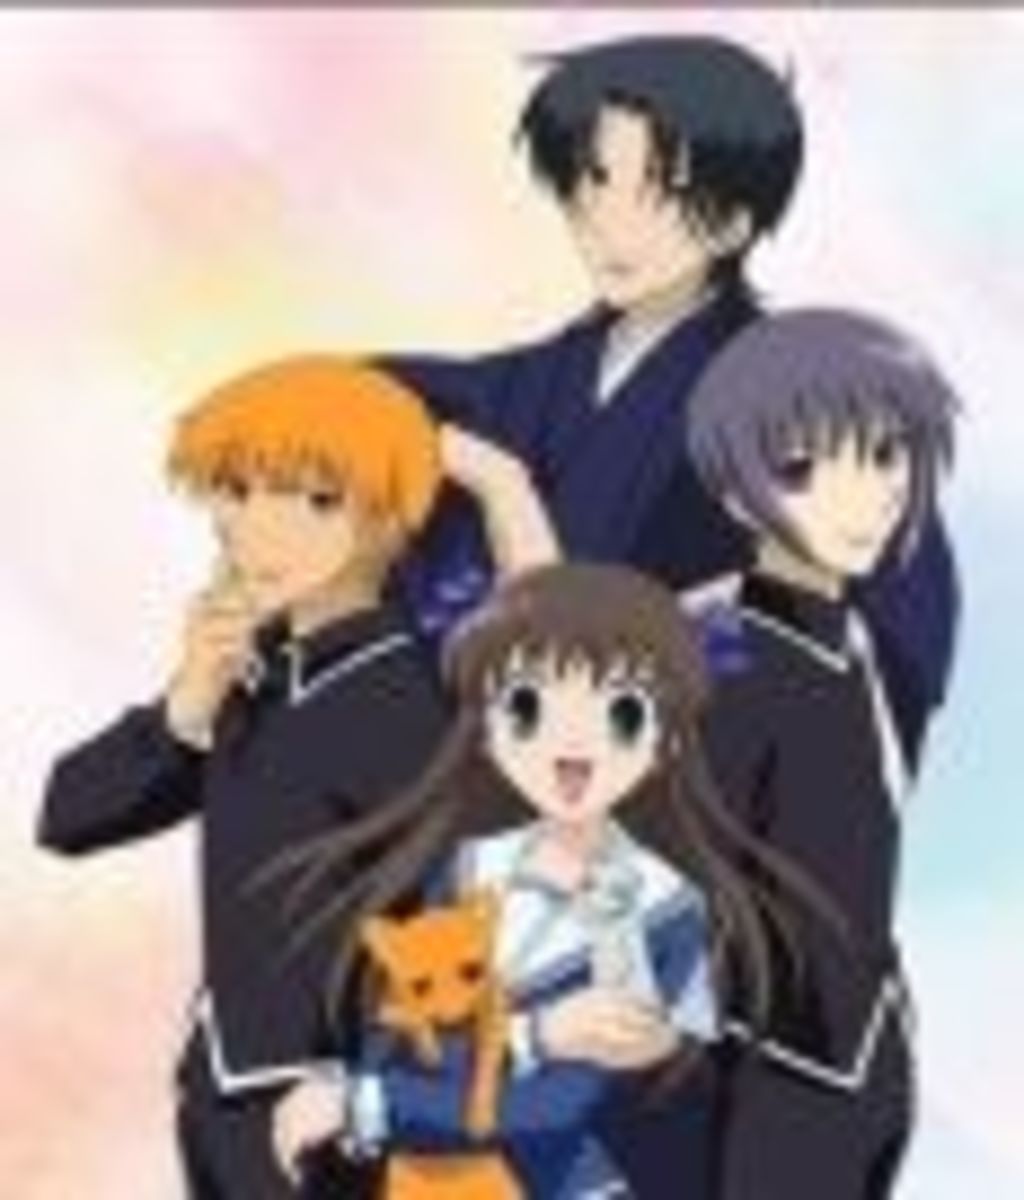 60+ Fruits Basket HD Wallpapers and Backgrounds